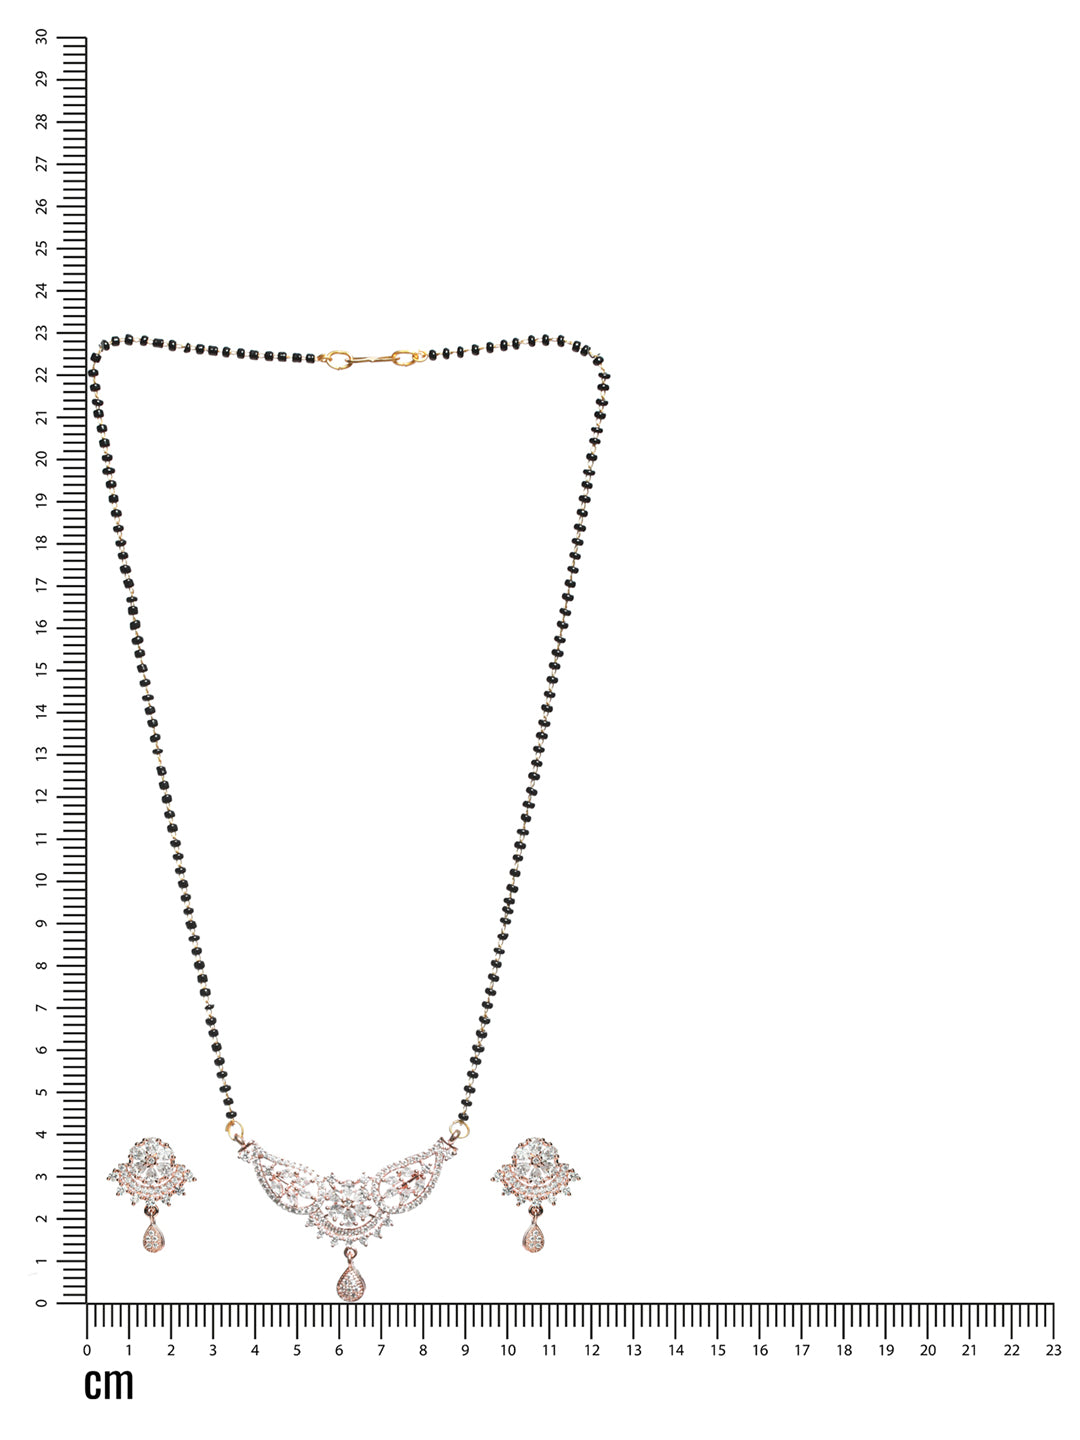 Rose Gold-Plated Black Beaded & White AD Stone-Studded Mangalsutra With Earrings - Jazzandsizzle